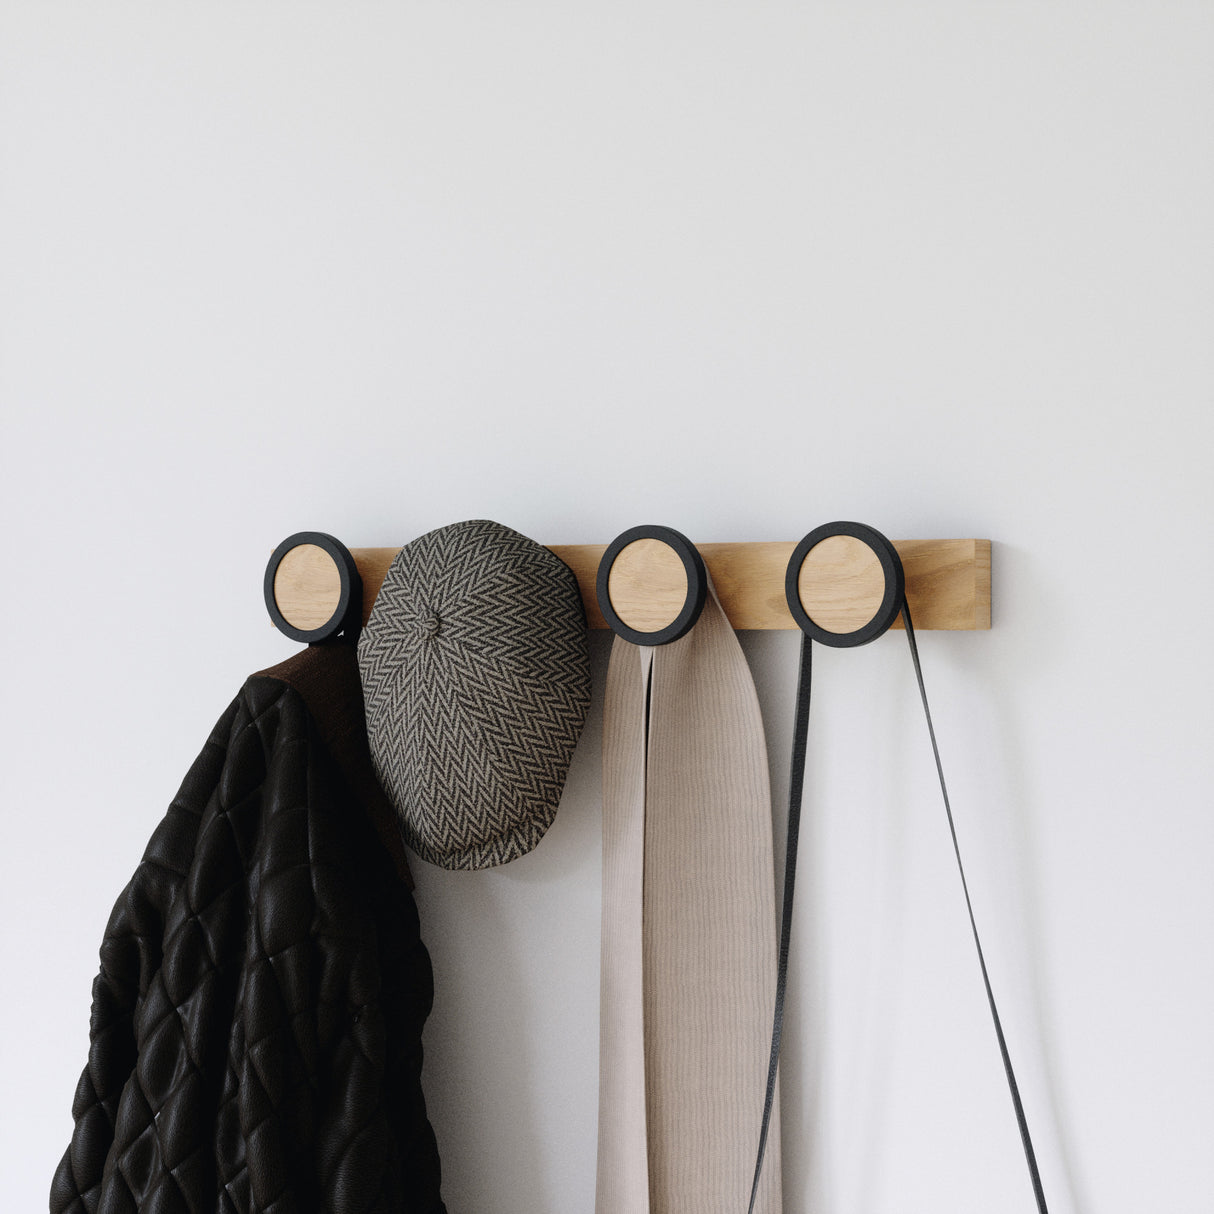 Wall Hooks | color: Natural | https://player.vimeo.com/video/533258247